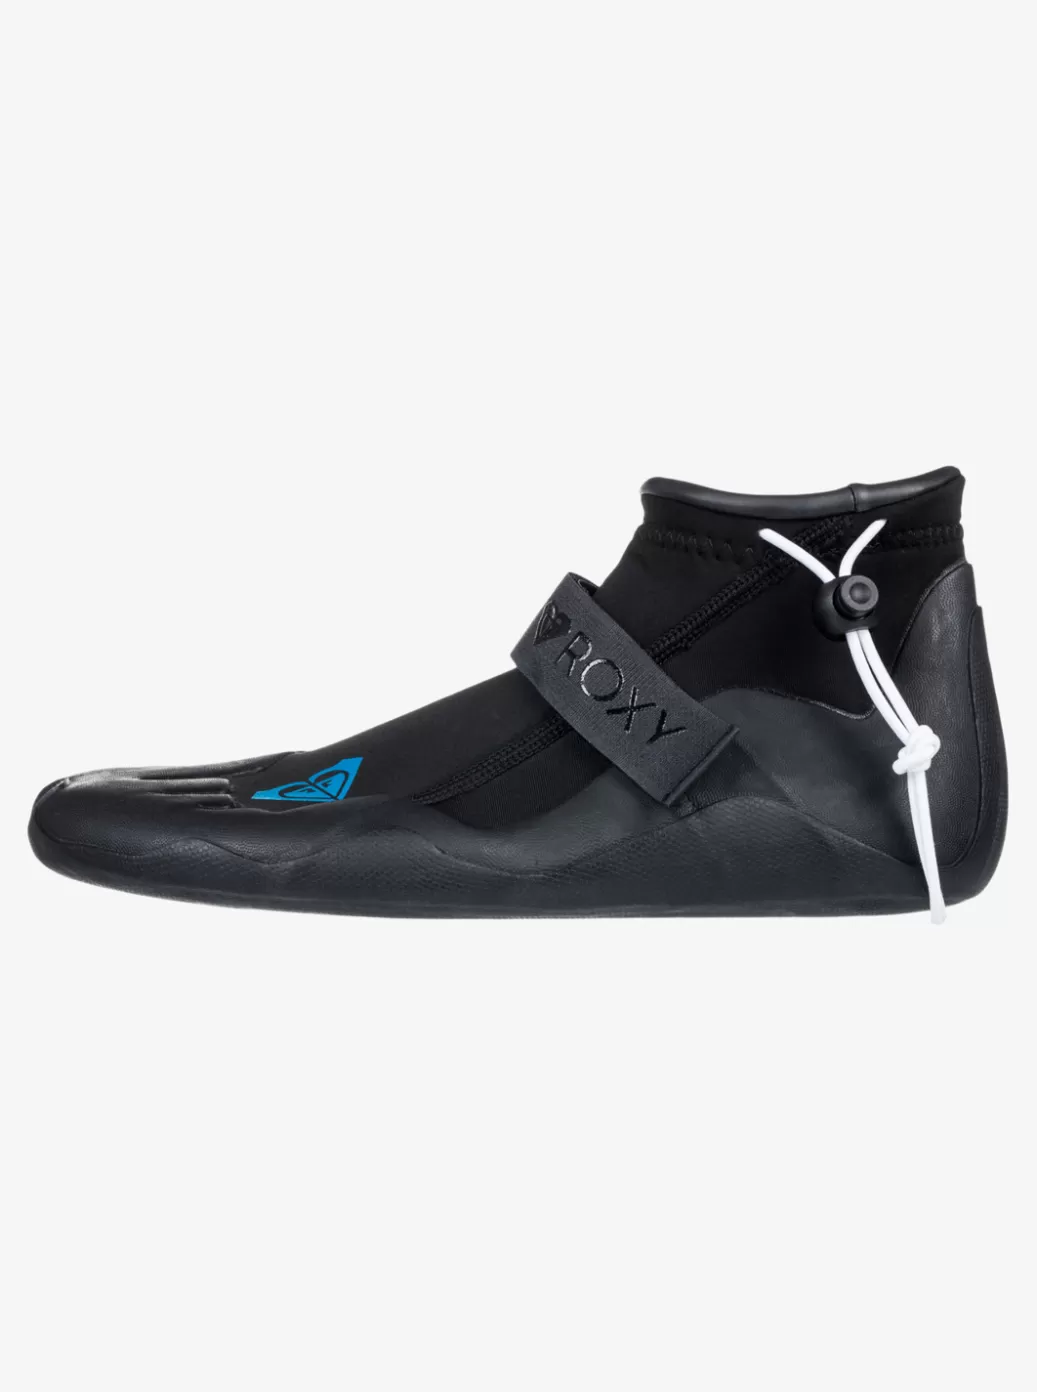 Swell Series | Surf Boots | WOMEN ROXY 2mm Swell Series Round Toe Wetsuit Reef Boots True Black